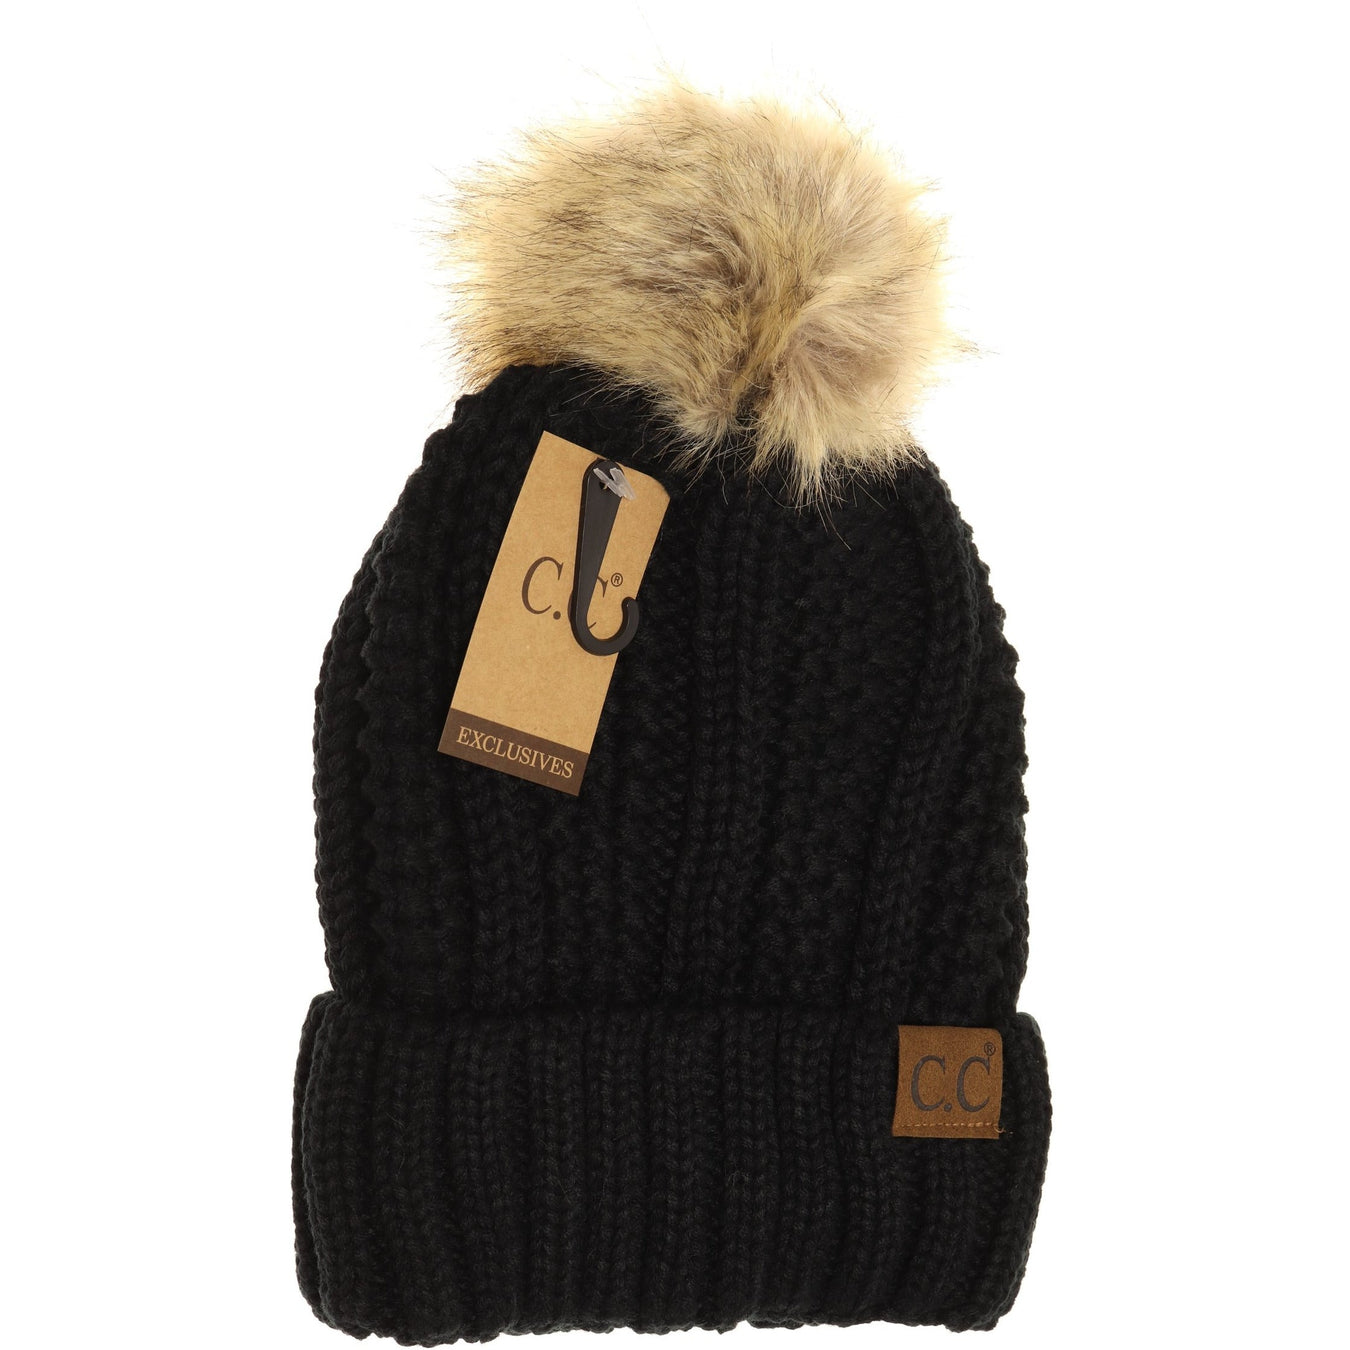 Accessories - Outerwear - Hats